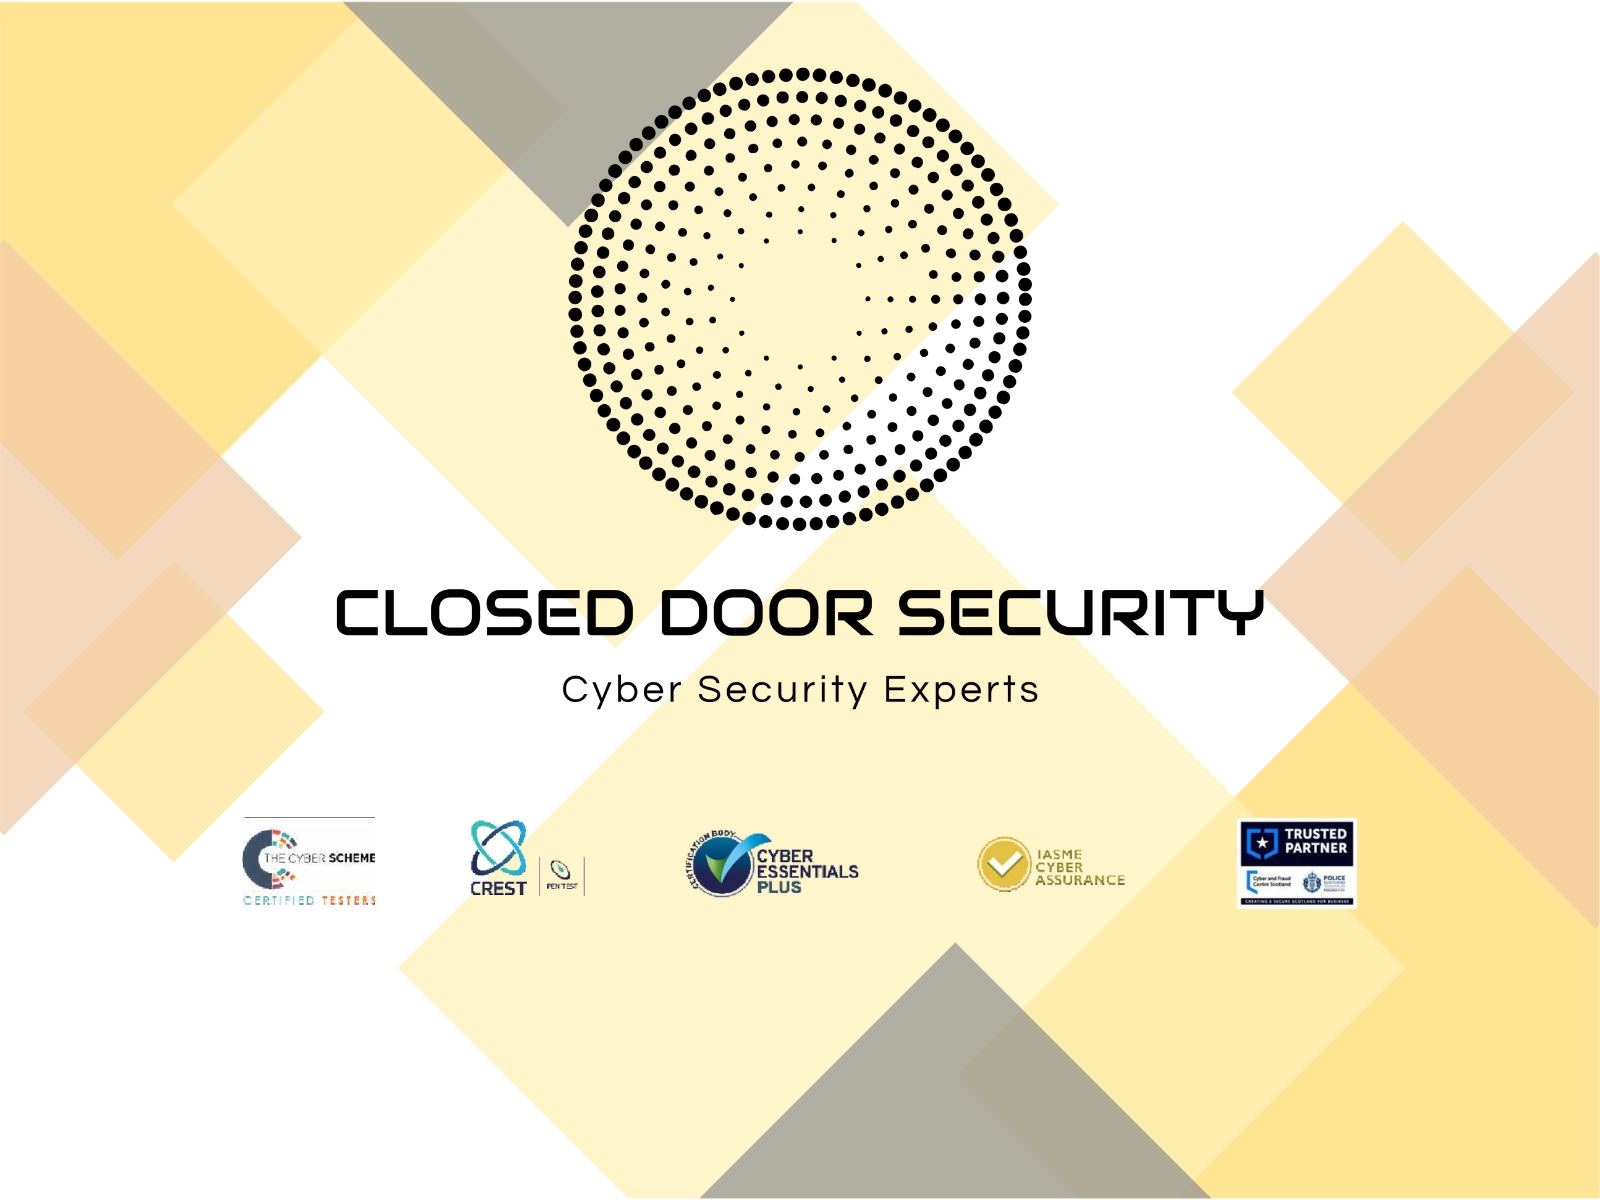 certifications-and-qualifications-of-the-closed-door-security-team